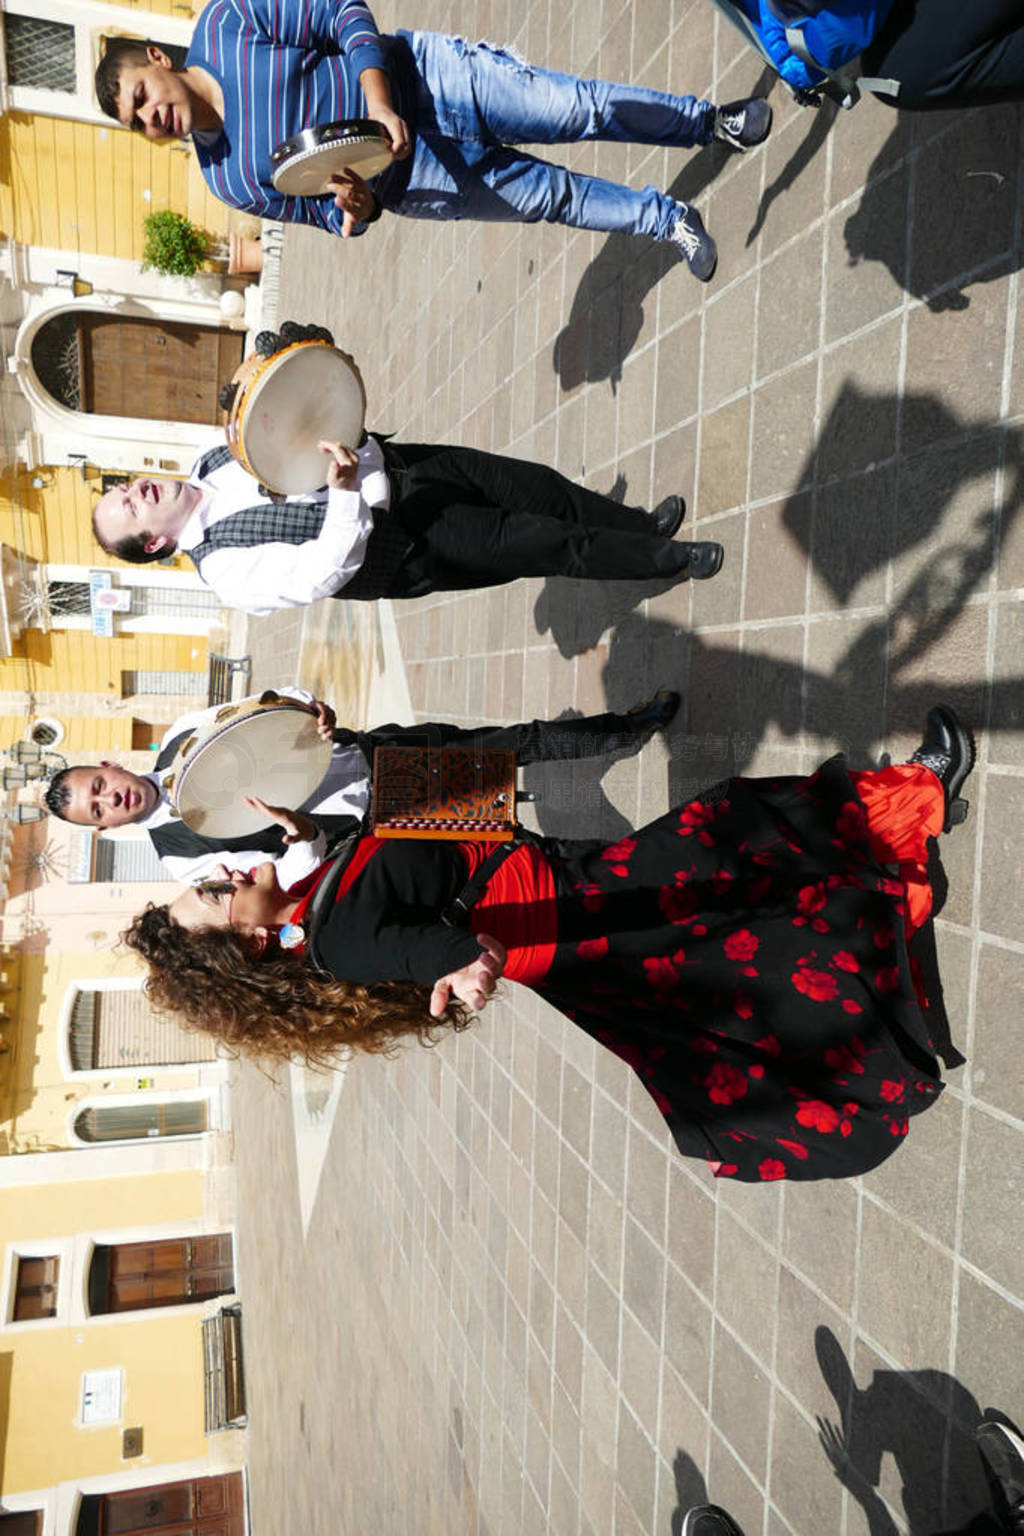 Woman in red and men on tambourines playing pizzica music